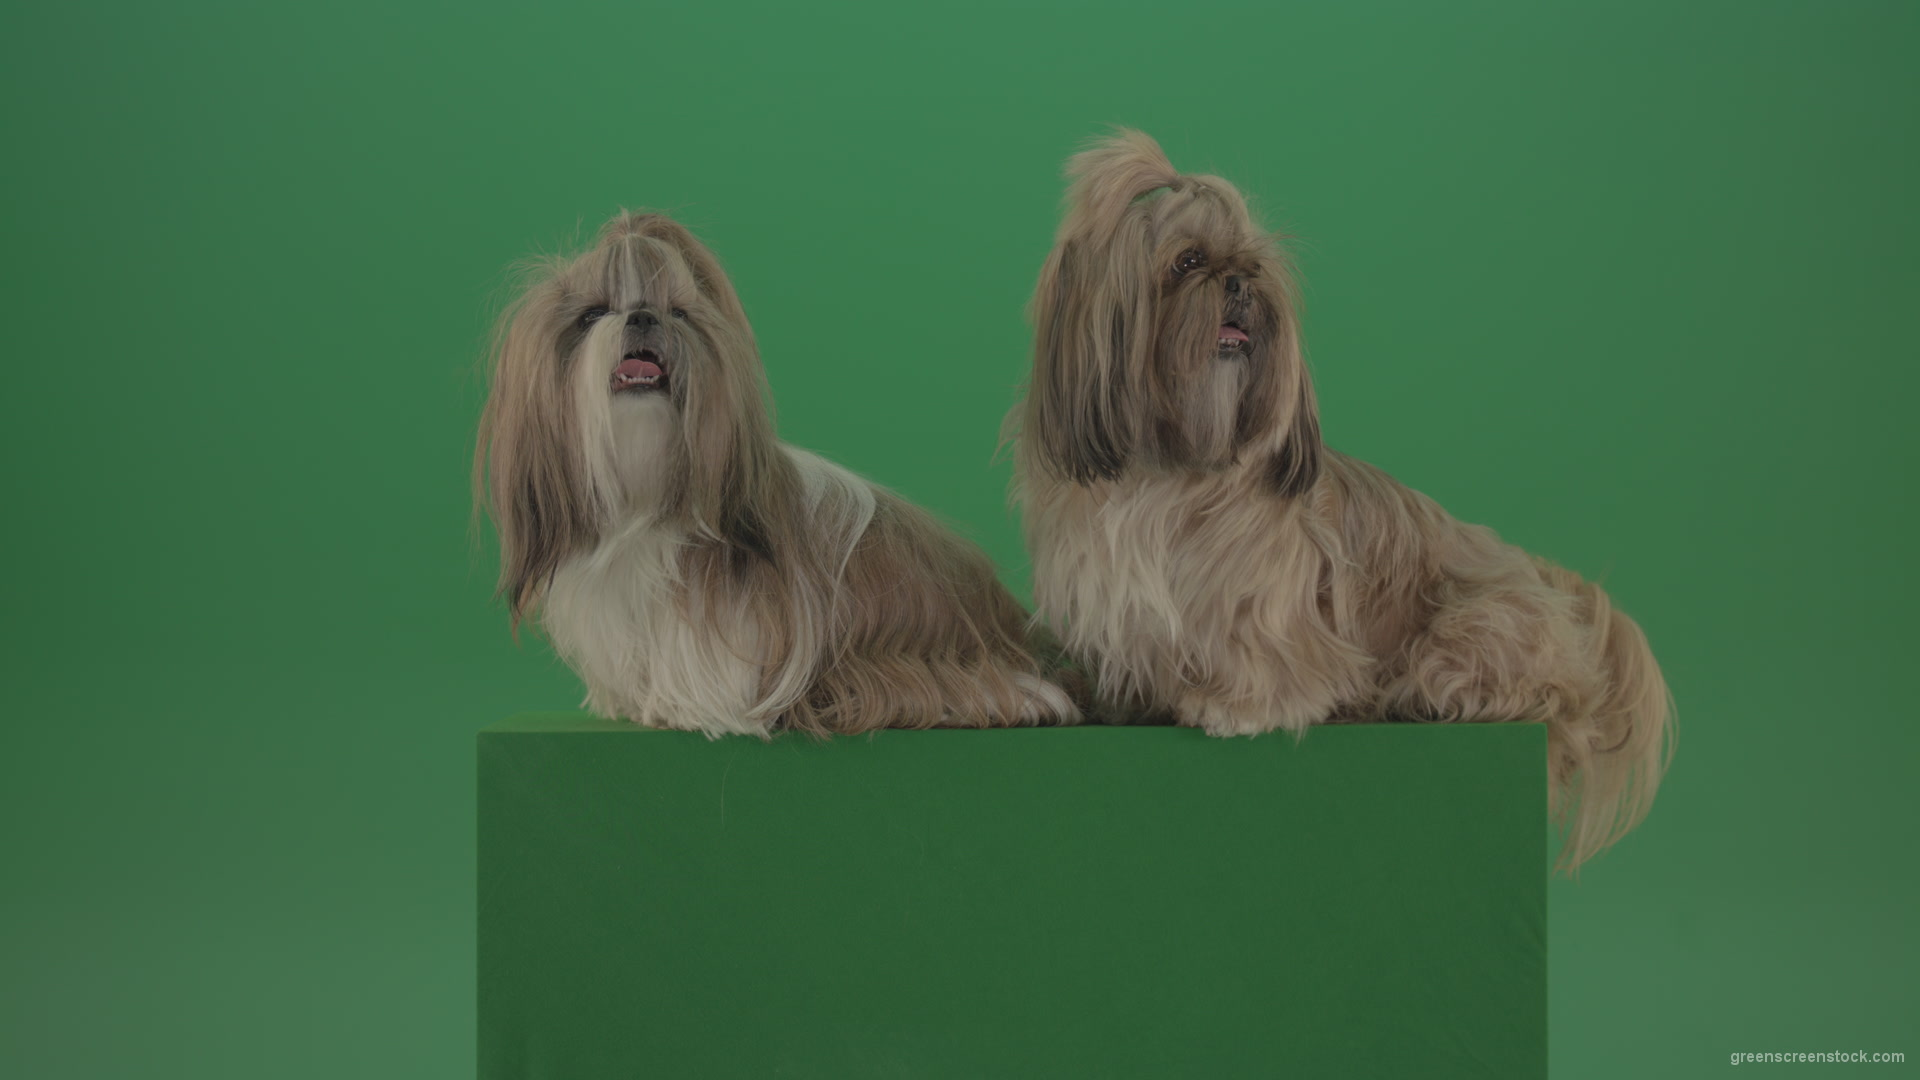 Awards-winners-Shih-tzu-fashion-luxury-expensive-dog-in-side-view-isolated-on-green-screen_008 Green Screen Stock